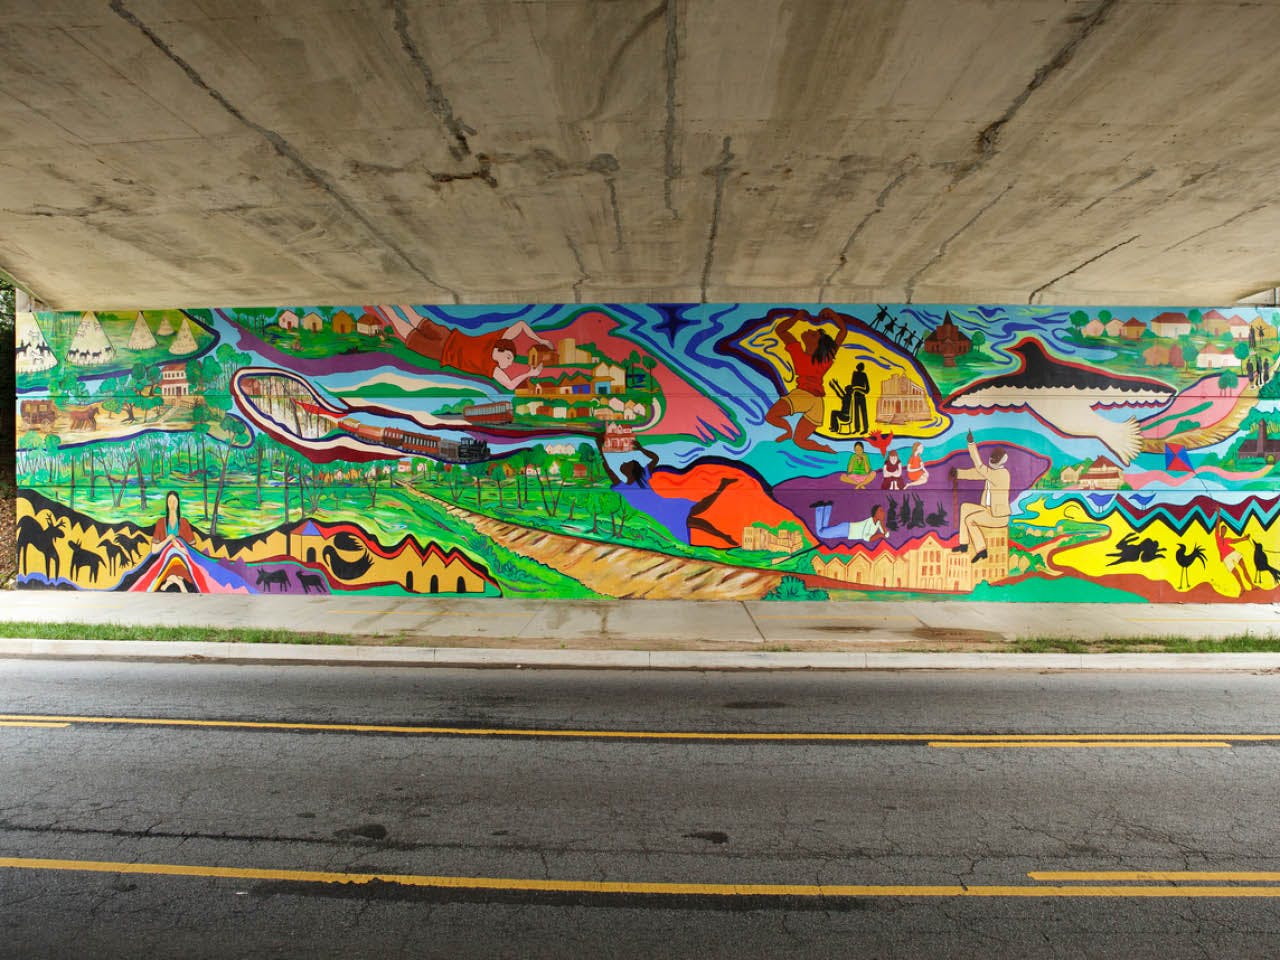 The mural "West End Remembers" by Malaika Favorite covers the length of a bridge abutment under Lawton Street.